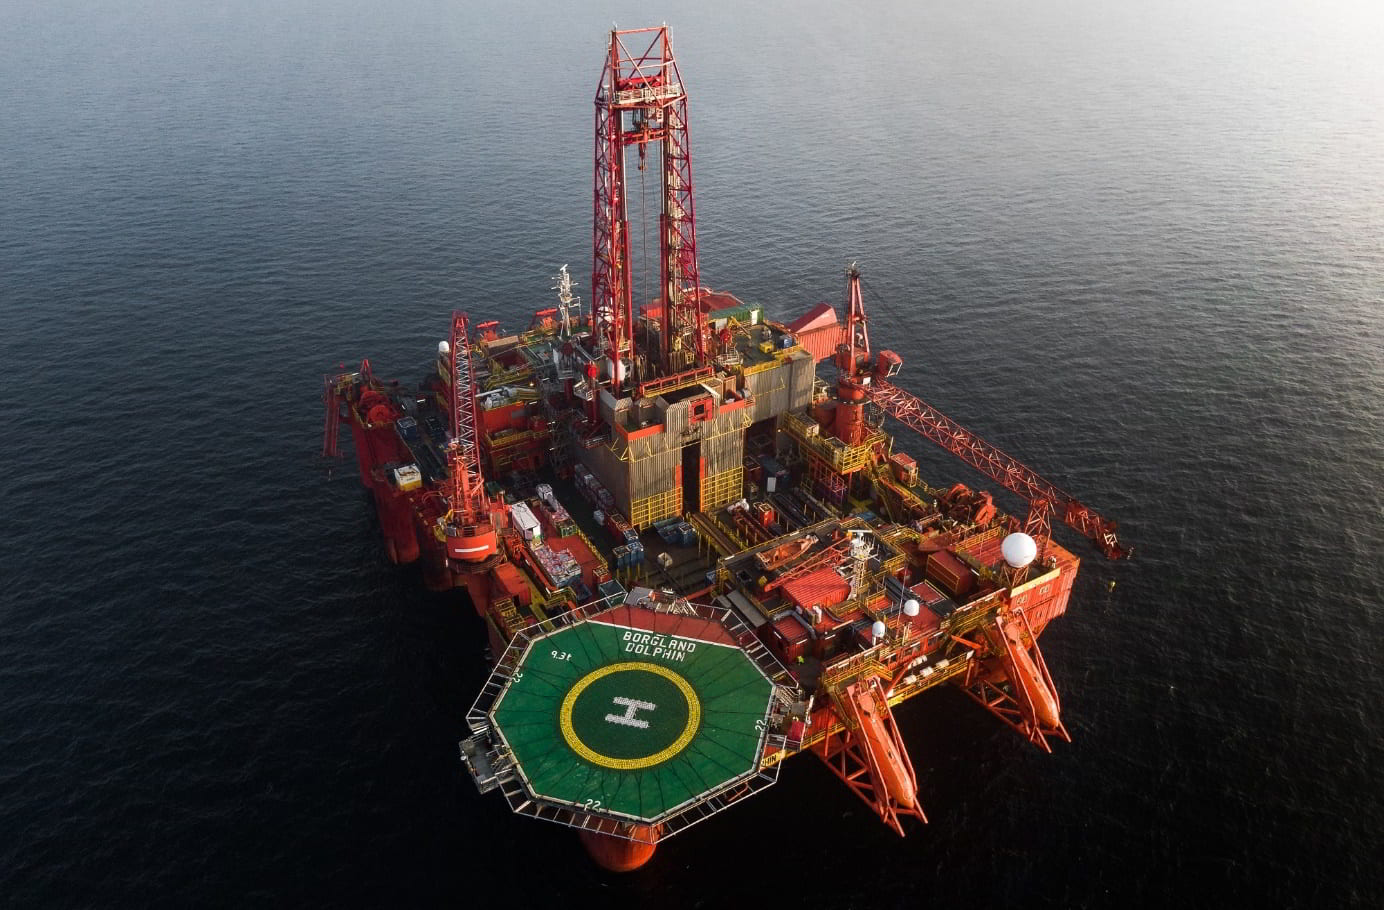 No traces of petroleum for PGNiG in Norwegian Sea well